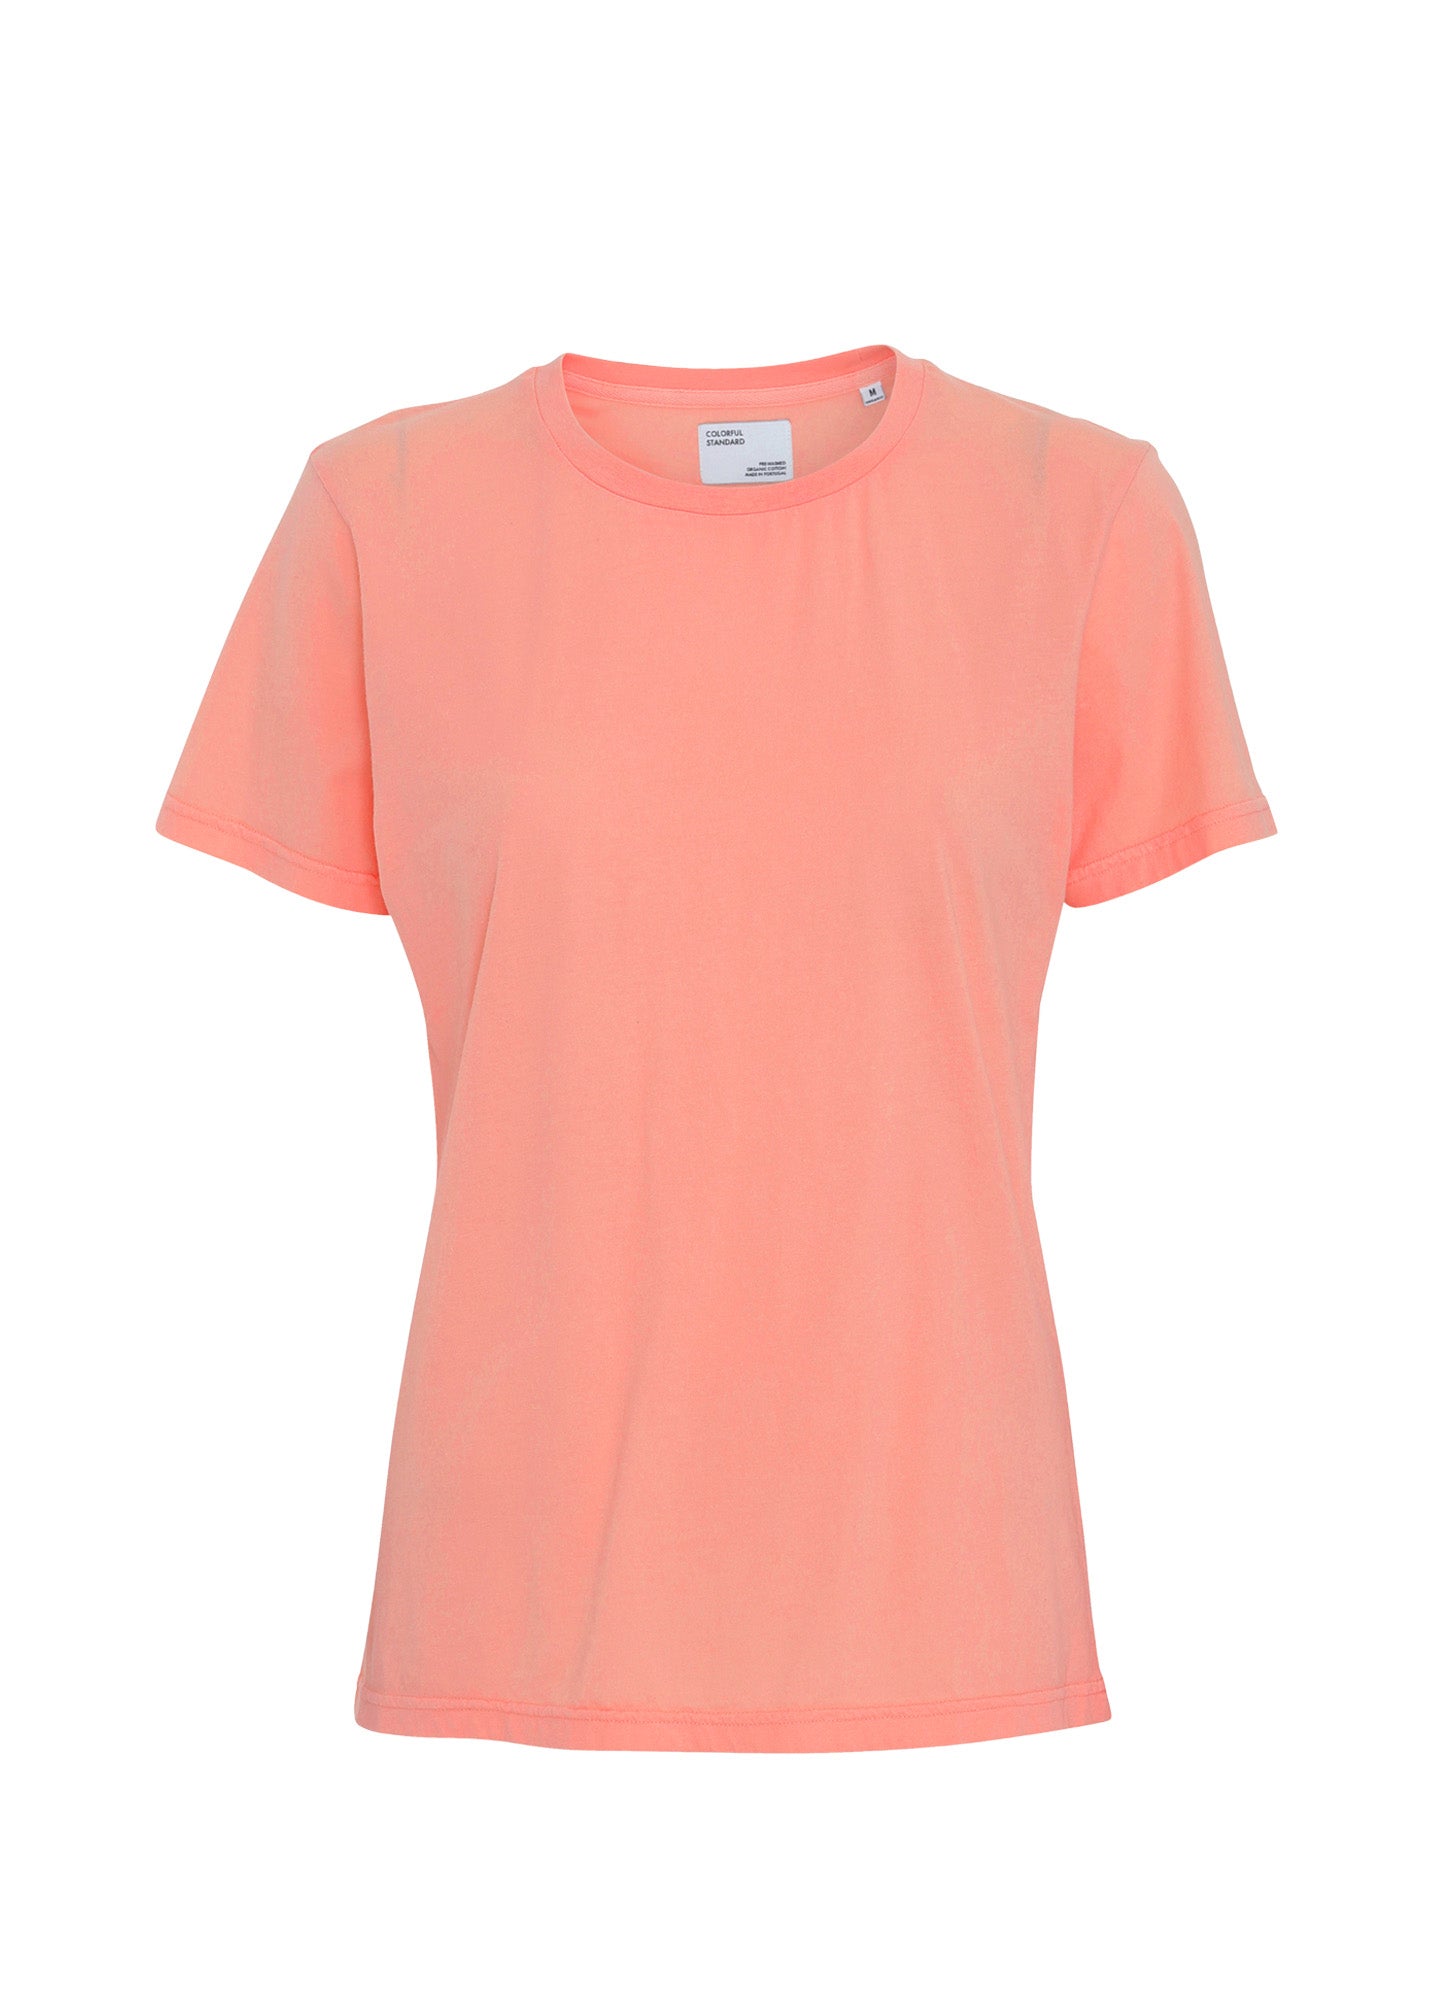 Colorful Standard Light Organic Tee - Bright Coral